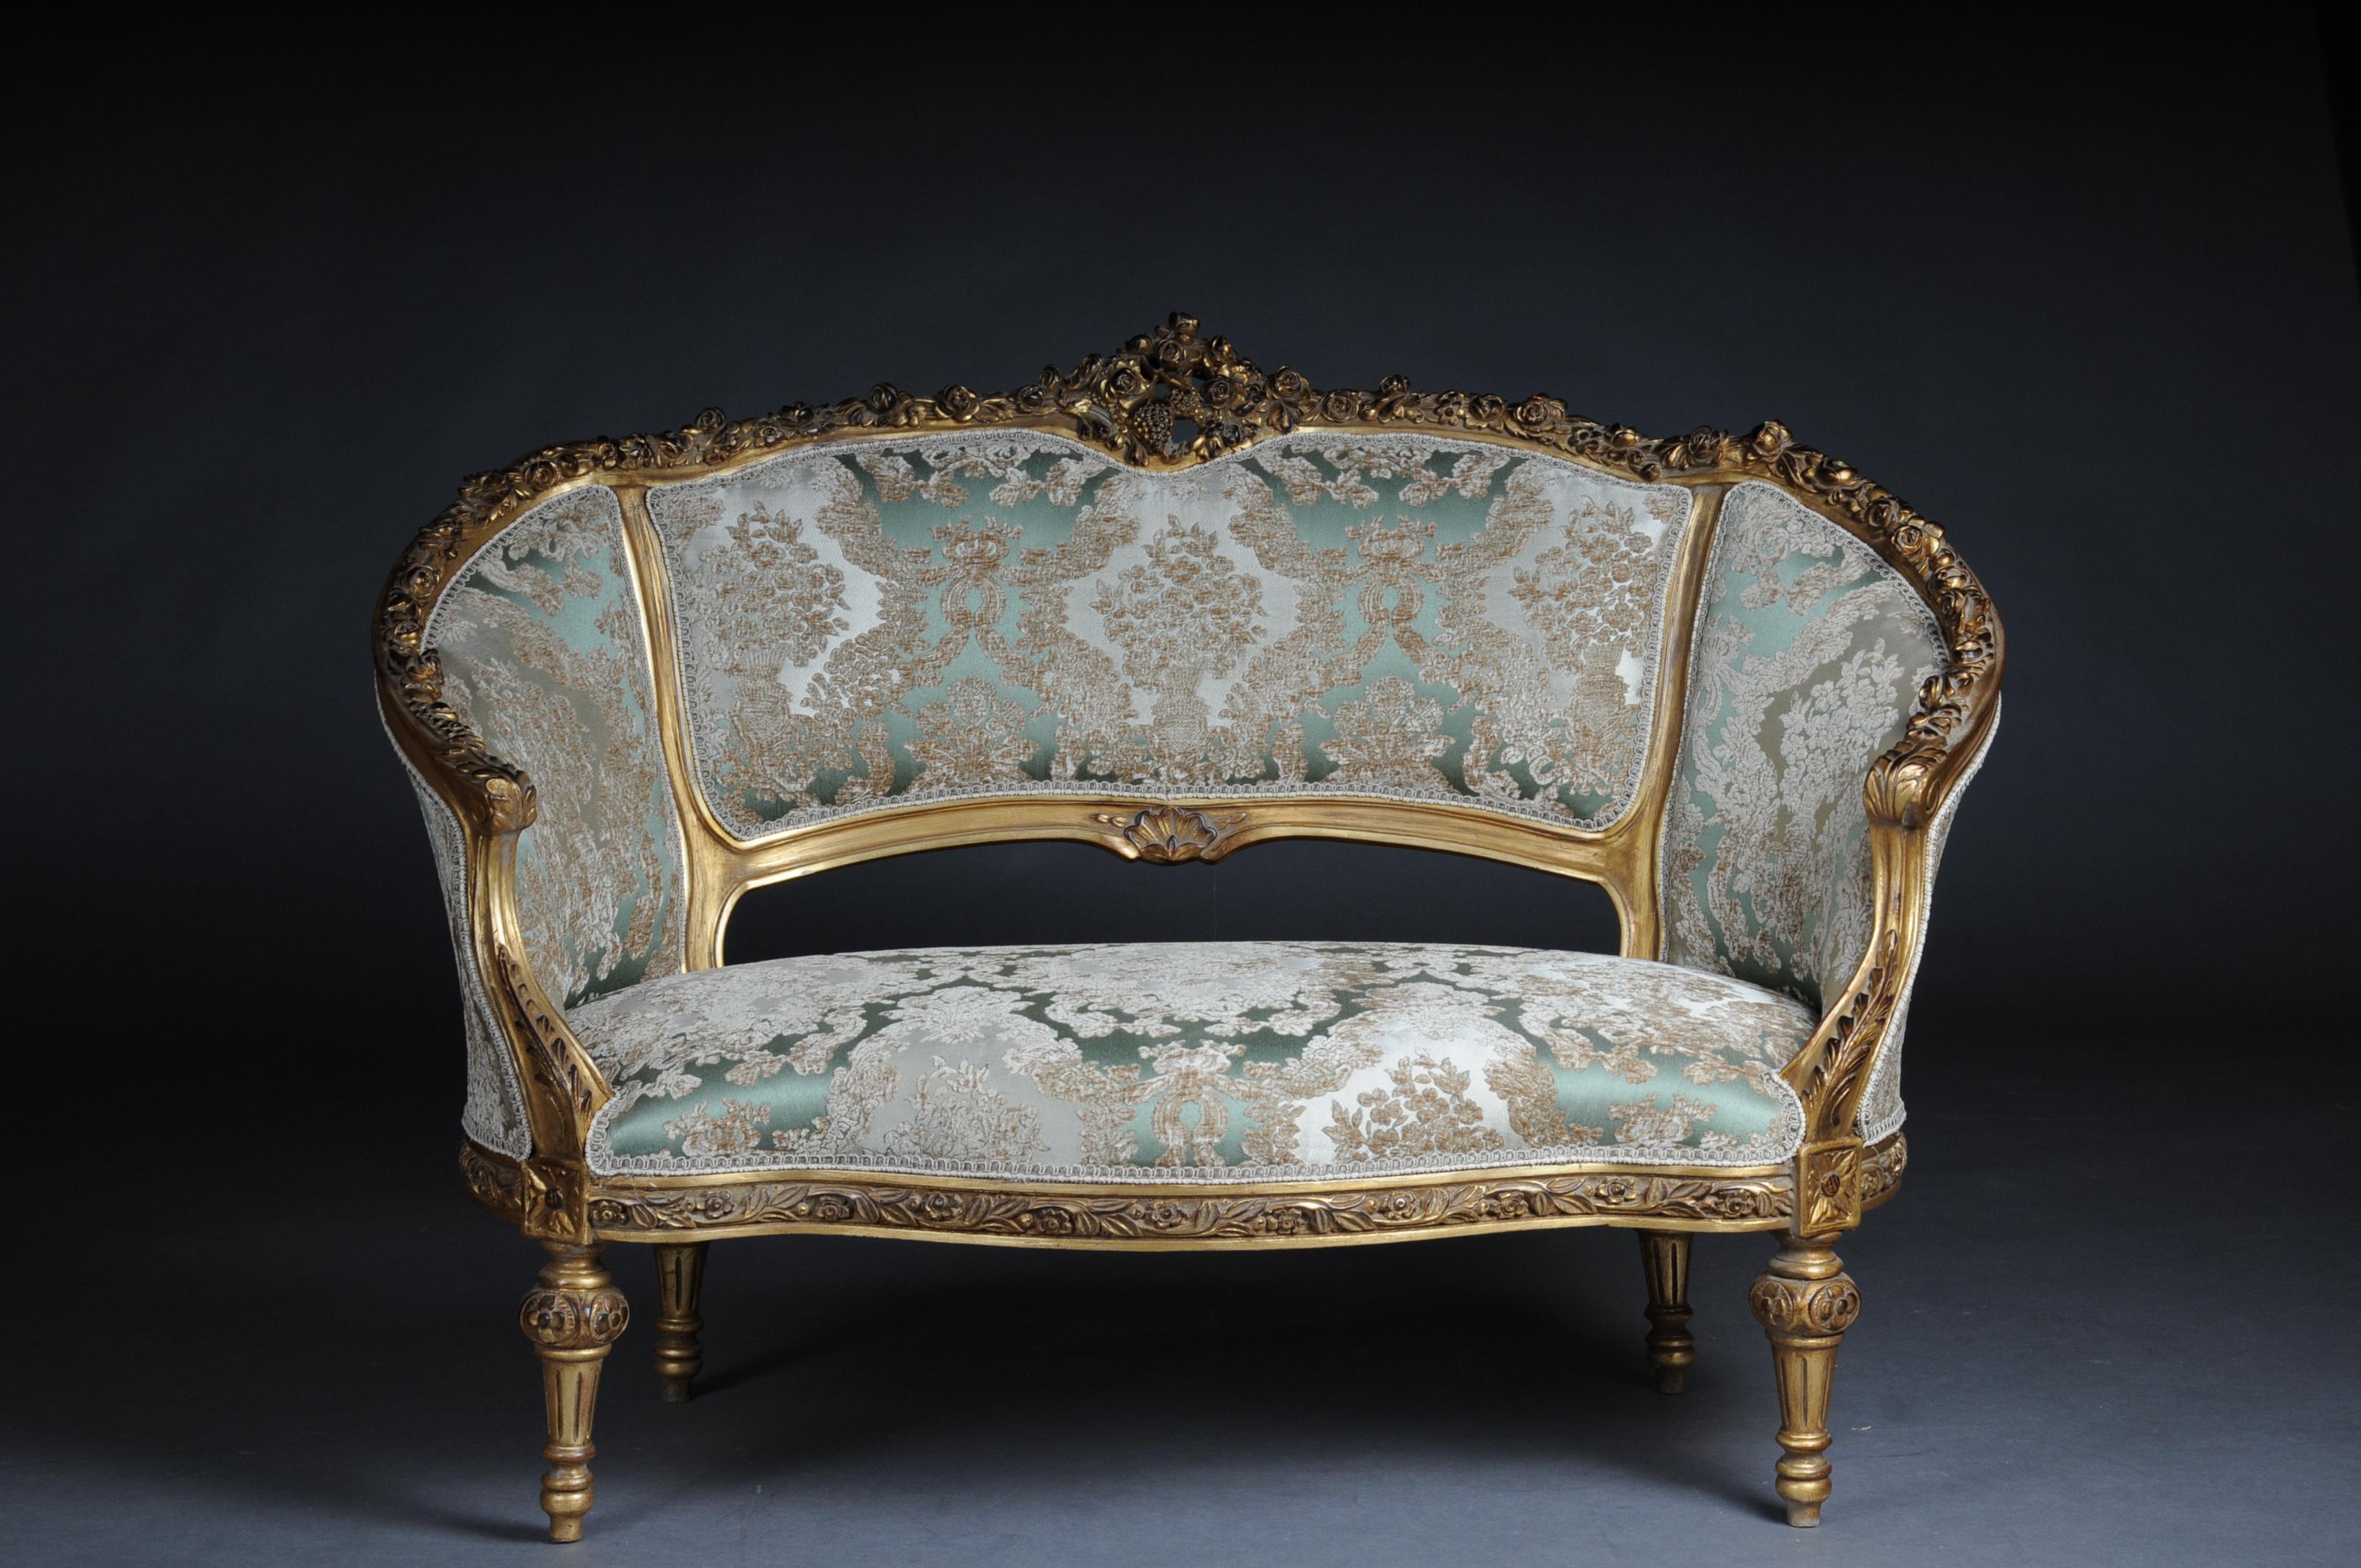 Elegant sofa, canapé, couch in Rococo or Louis XV style.

Solid beech wood, carved and gilded. Rising backrest framing with openwork rocaille crowning. Appropriately curved frame with richly carved foliage. Slightly curved frame on straight legs.